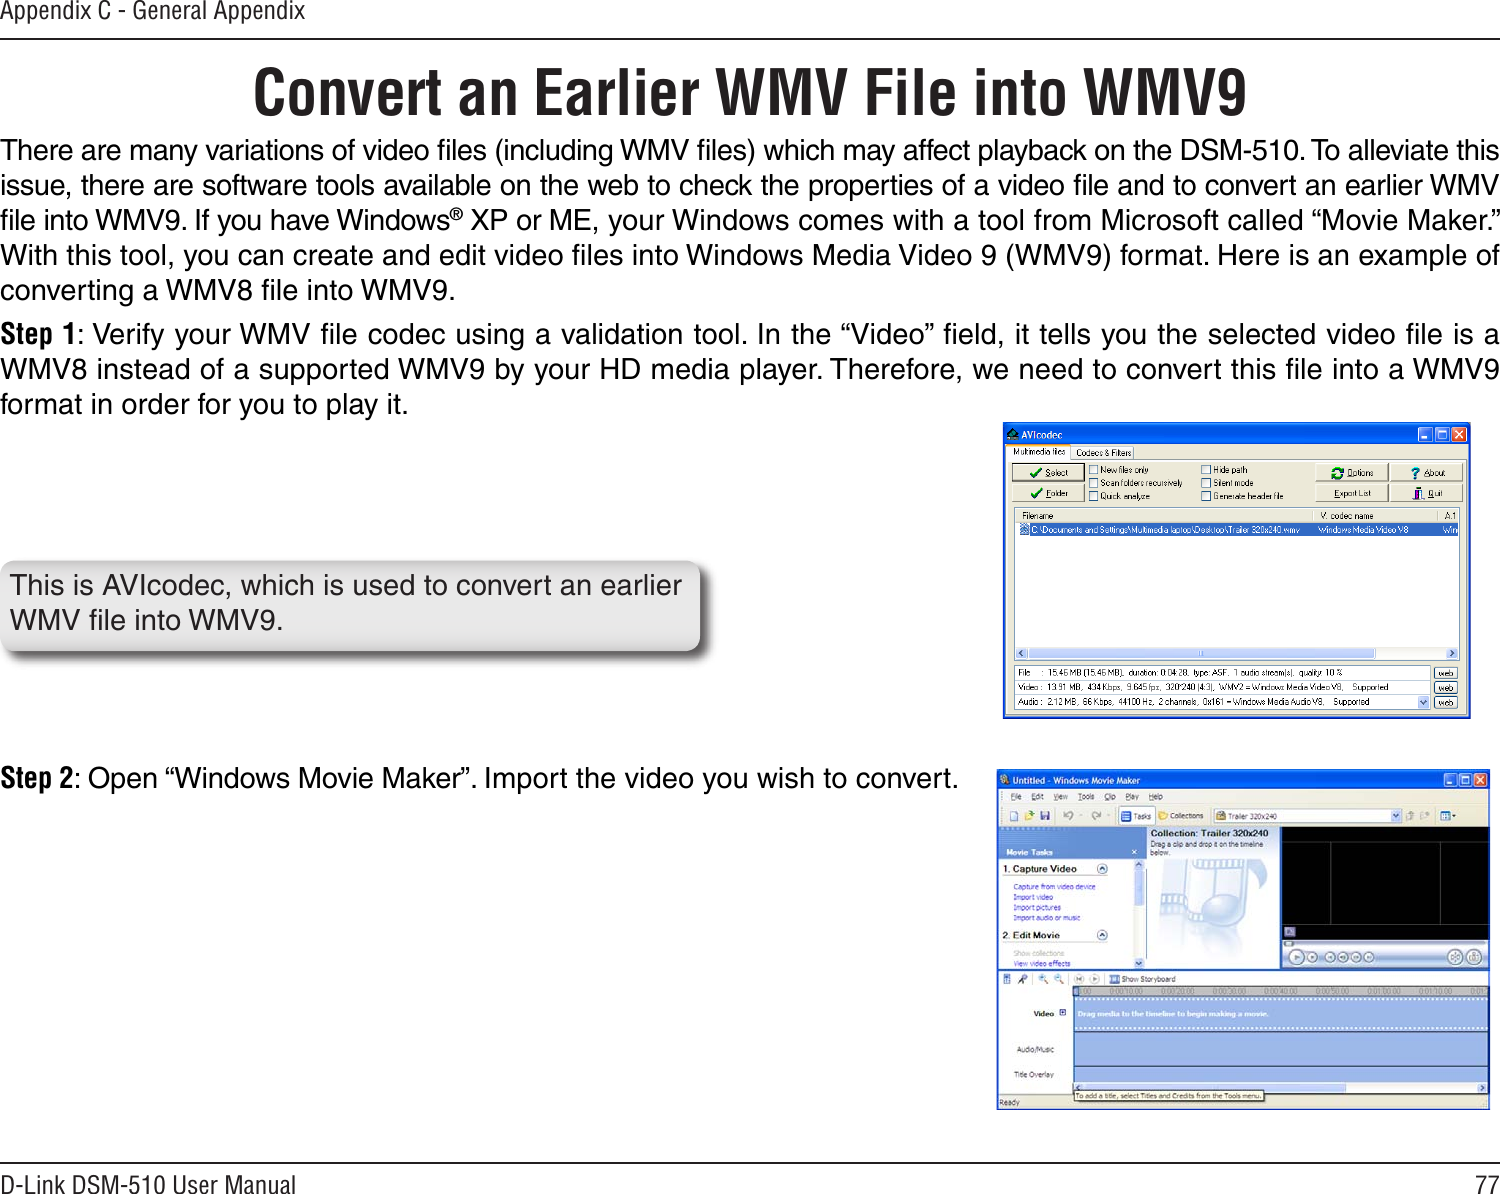 77D-Link DSM-510 User ManualAppendix C - General AppendixConvert an Earlier WMV File into WMV9 There are many variations of video ﬁles (including WMV ﬁles) which may affect playback on the DSM-510. To alleviate this issue, there are software tools available on the web to check the properties of a video ﬁle and to convert an earlier WMV ﬁle into WMV9. If you have Windows® XP or ME, your Windows comes with a tool from Microsoft called “Movie Maker.” With this tool, you can create and edit video ﬁles into Windows Media Video 9 (WMV9) format. Here is an example of converting a WMV8 ﬁle into WMV9.Step 1: Verify your WMV ﬁle codec using a validation tool. In the “Video” ﬁeld, it tells you the selected video ﬁle is a WMV8 instead of a supported WMV9 by your HD media player. Therefore, we need to convert this ﬁle into a WMV9 format in order for you to play it.Step 2: Open “Windows Movie Maker”. Import the video you wish to convert. This is AVIcodec, which is used to convert an earlier WMV ﬁle into WMV9.